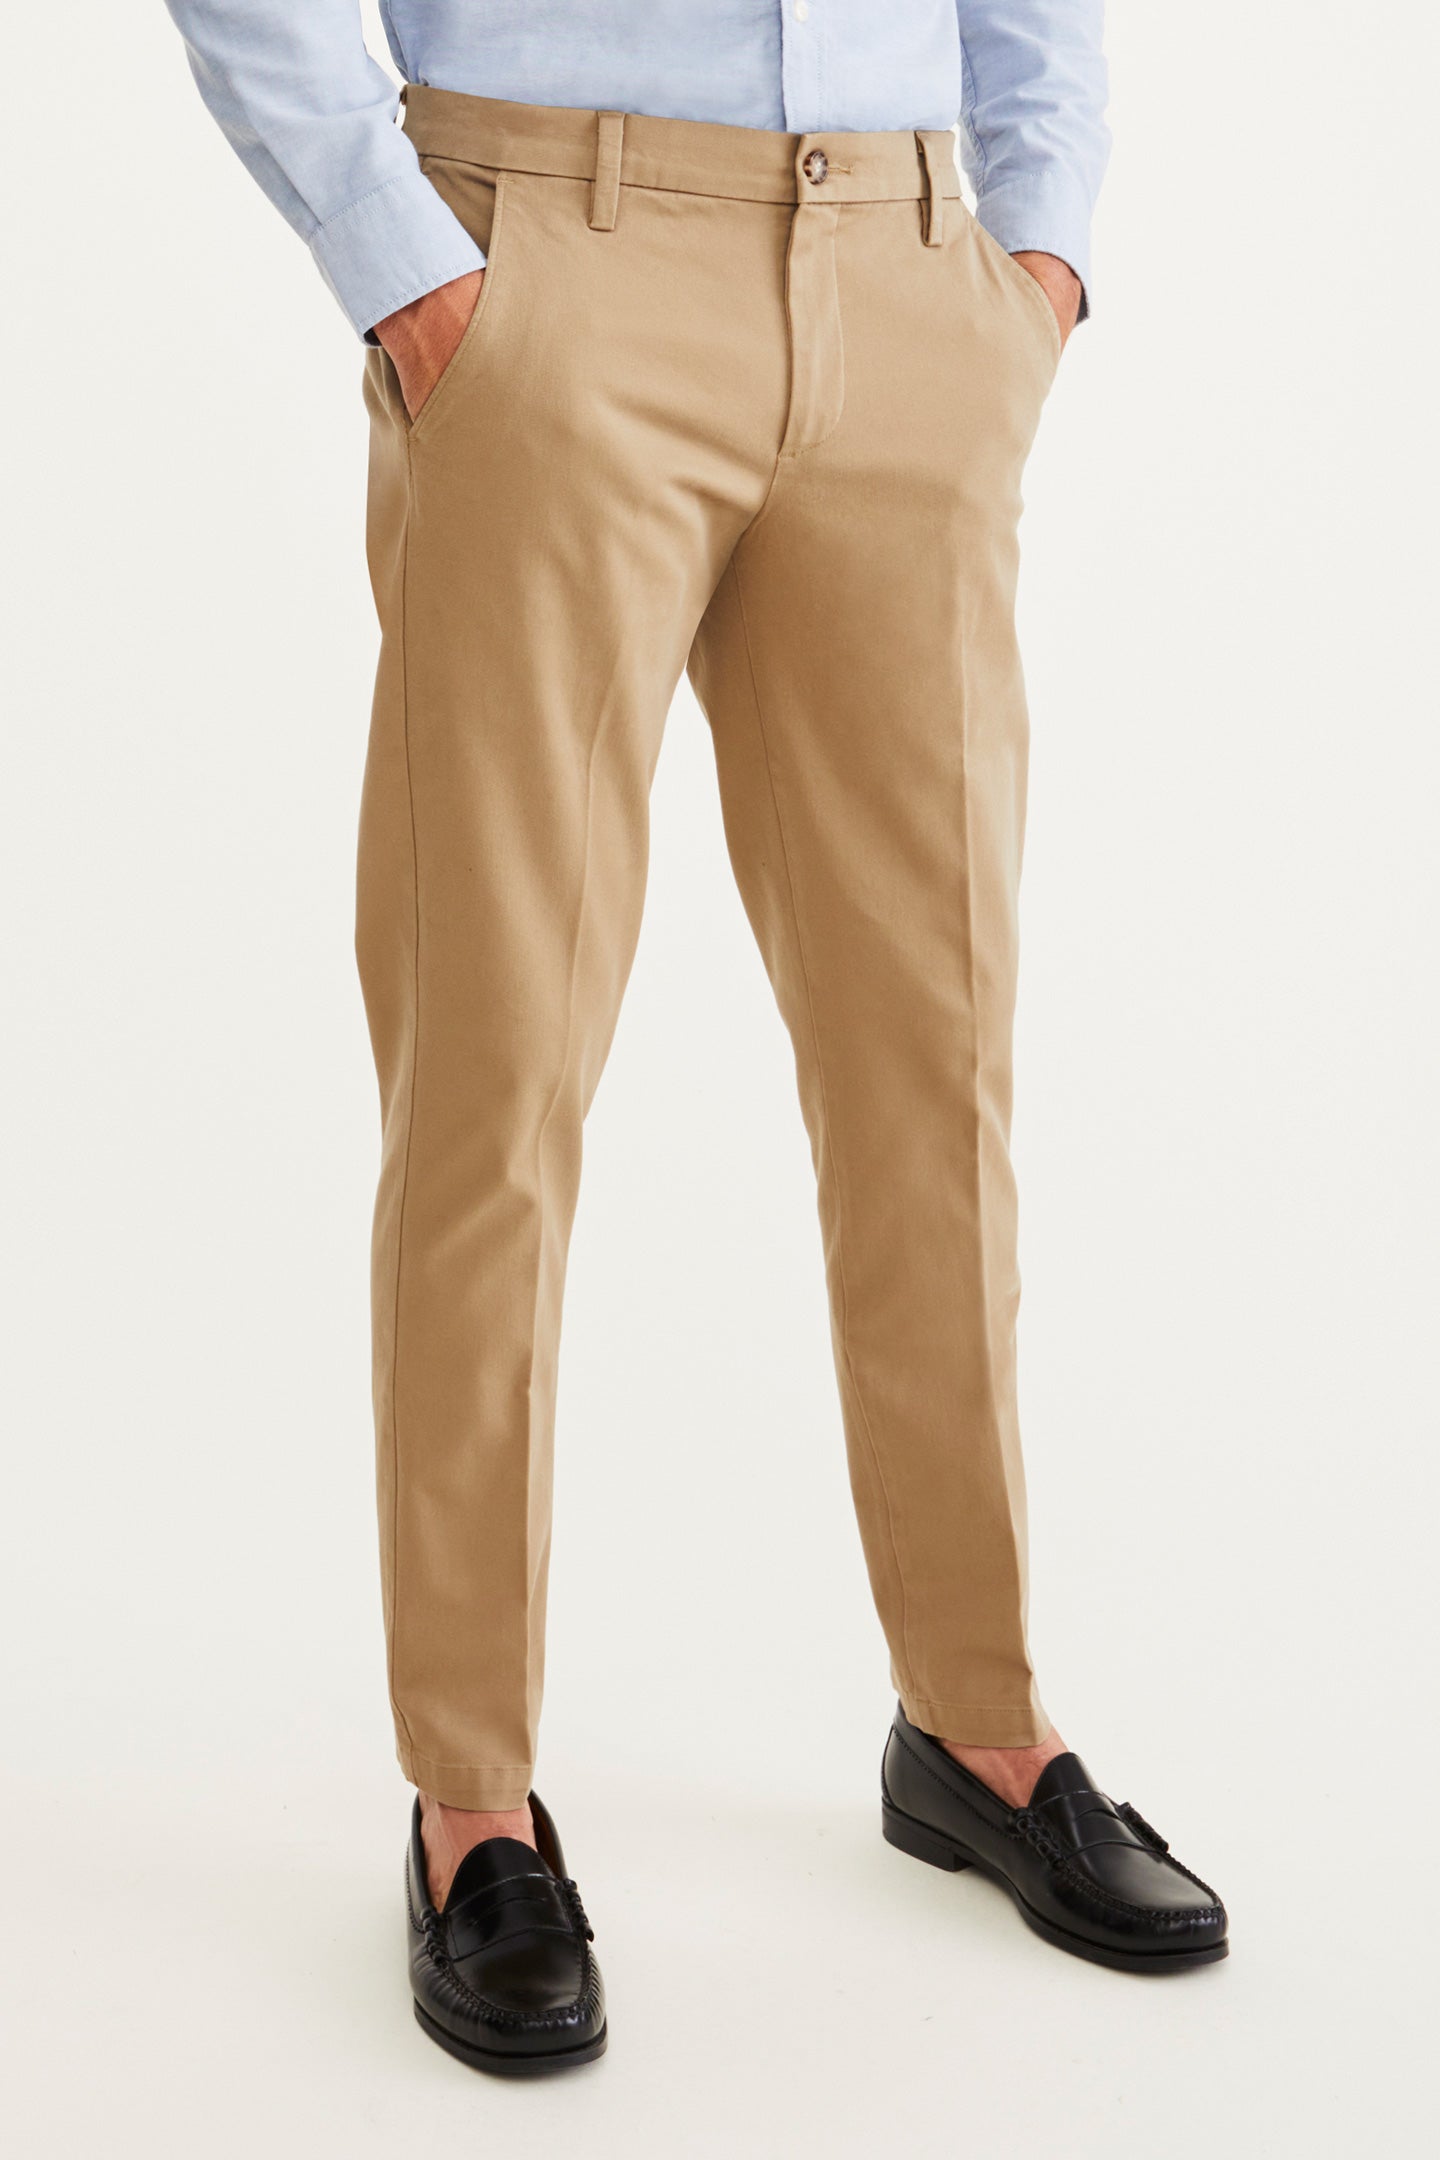 Testing Men's Crossover Office-to-Outdoors Pants